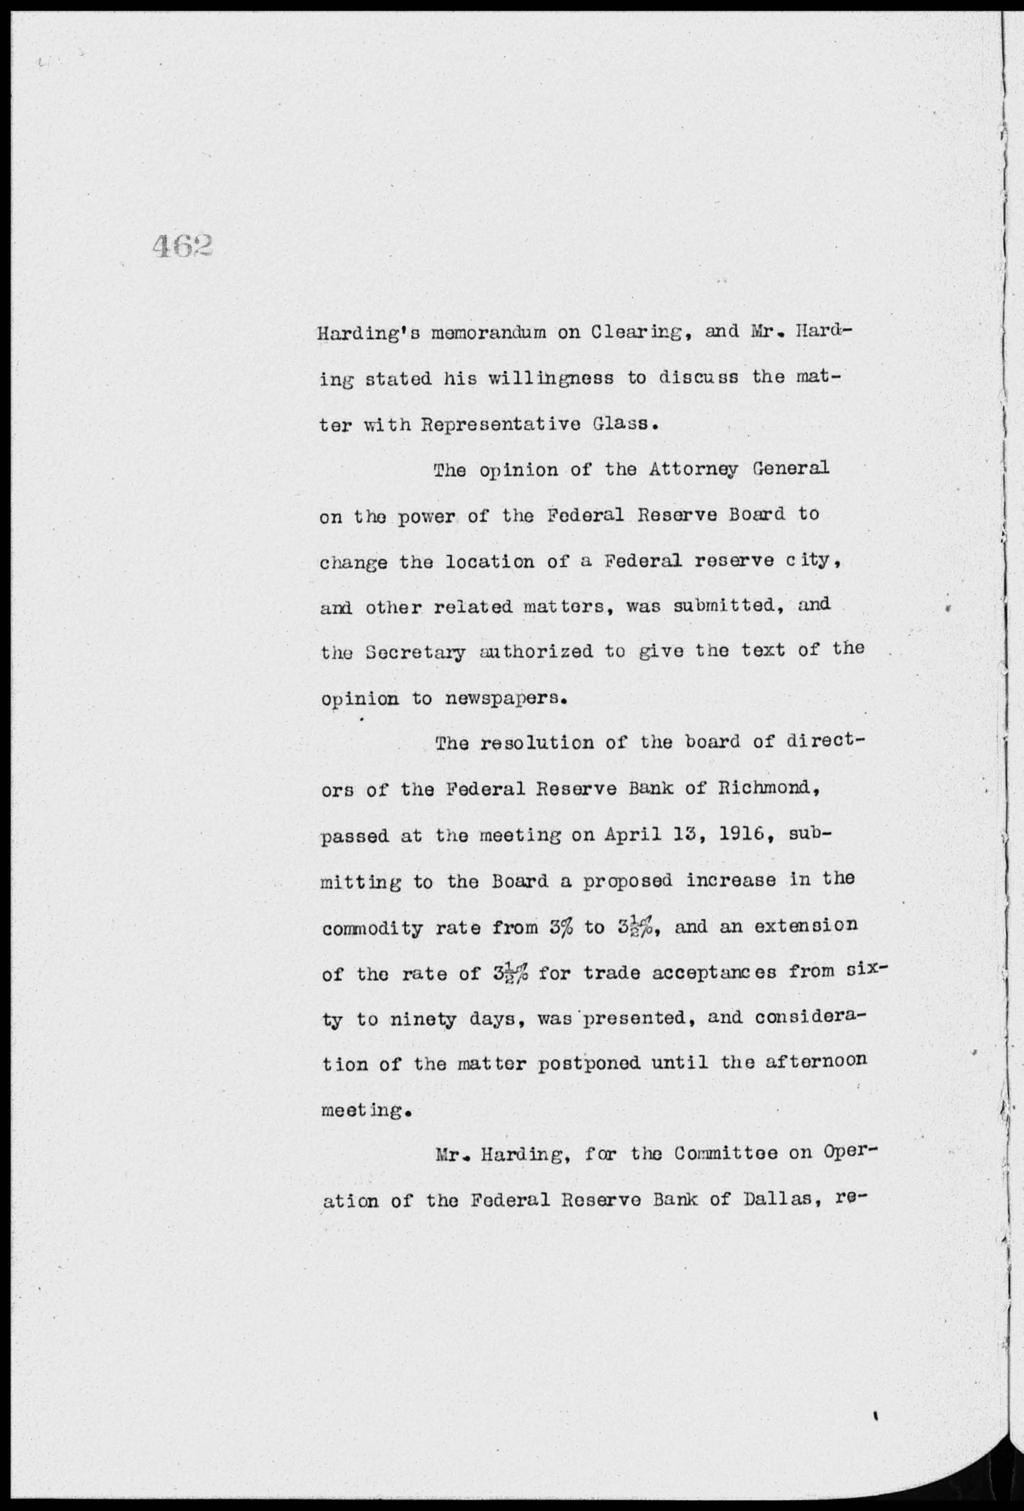 462 Harding's memorandum on Clearing, and Mr. Harding stated his willingness to discuss the matter with Representative Glass.